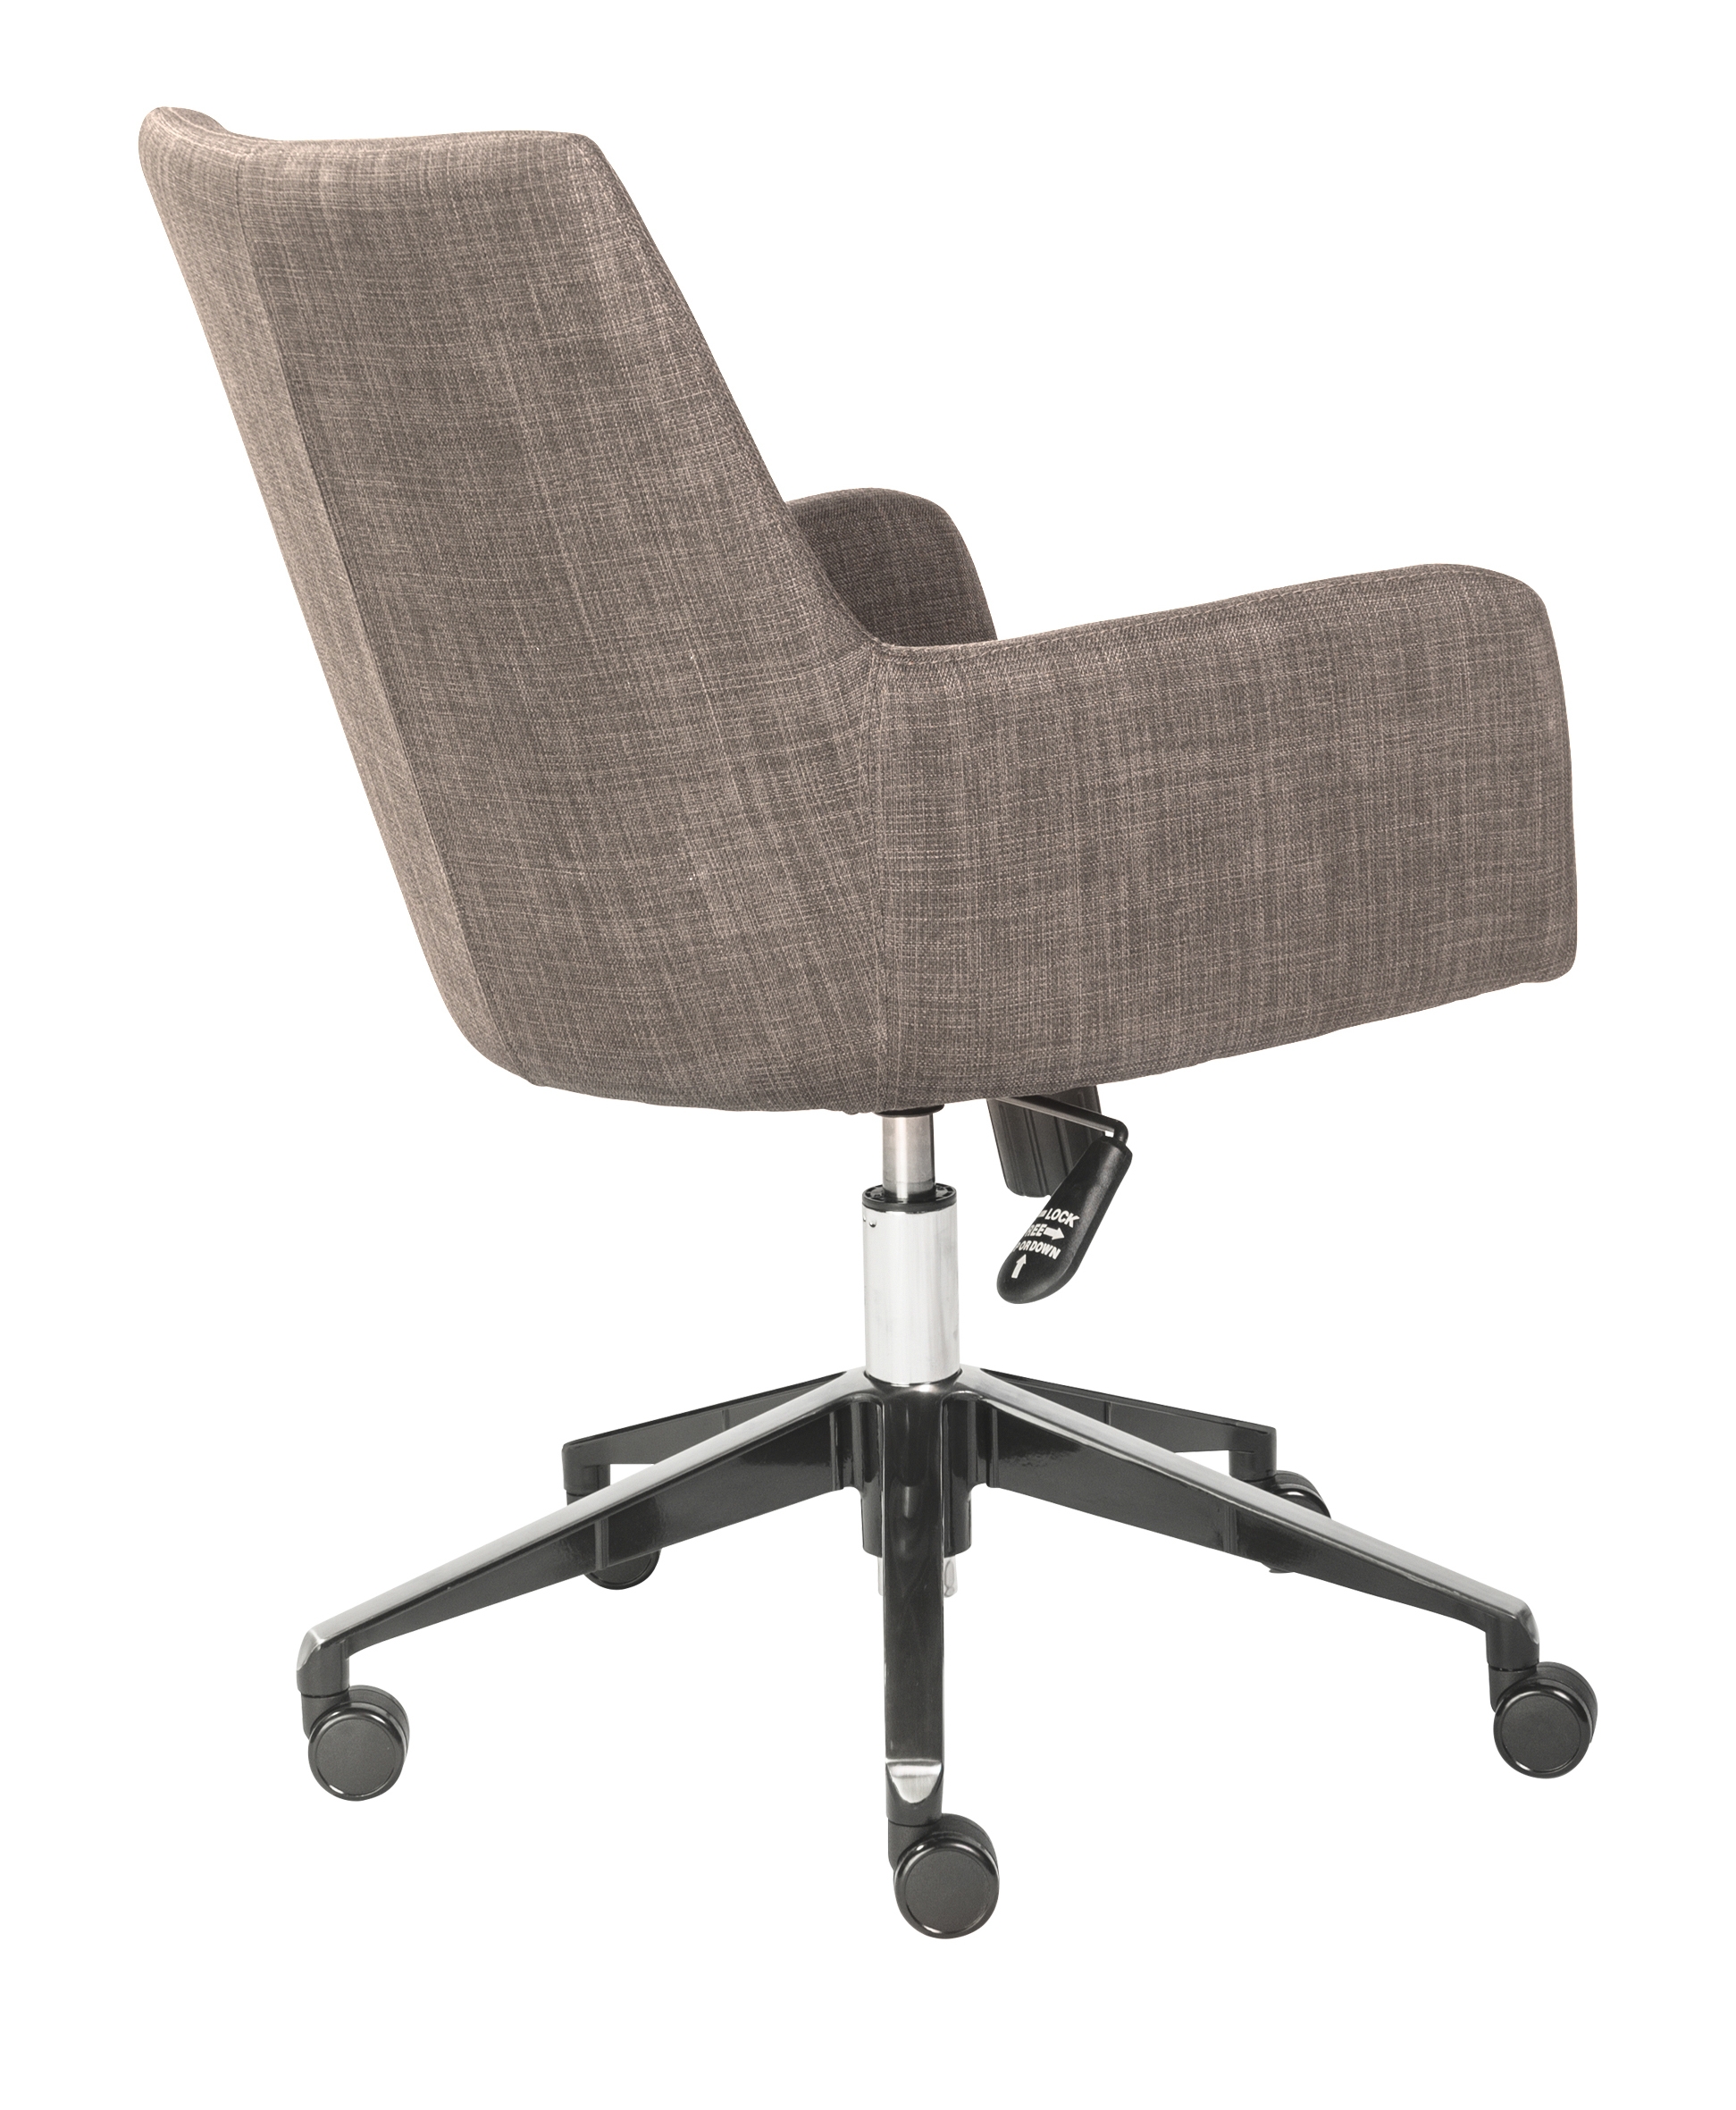 Patty Office Chair - Image 3